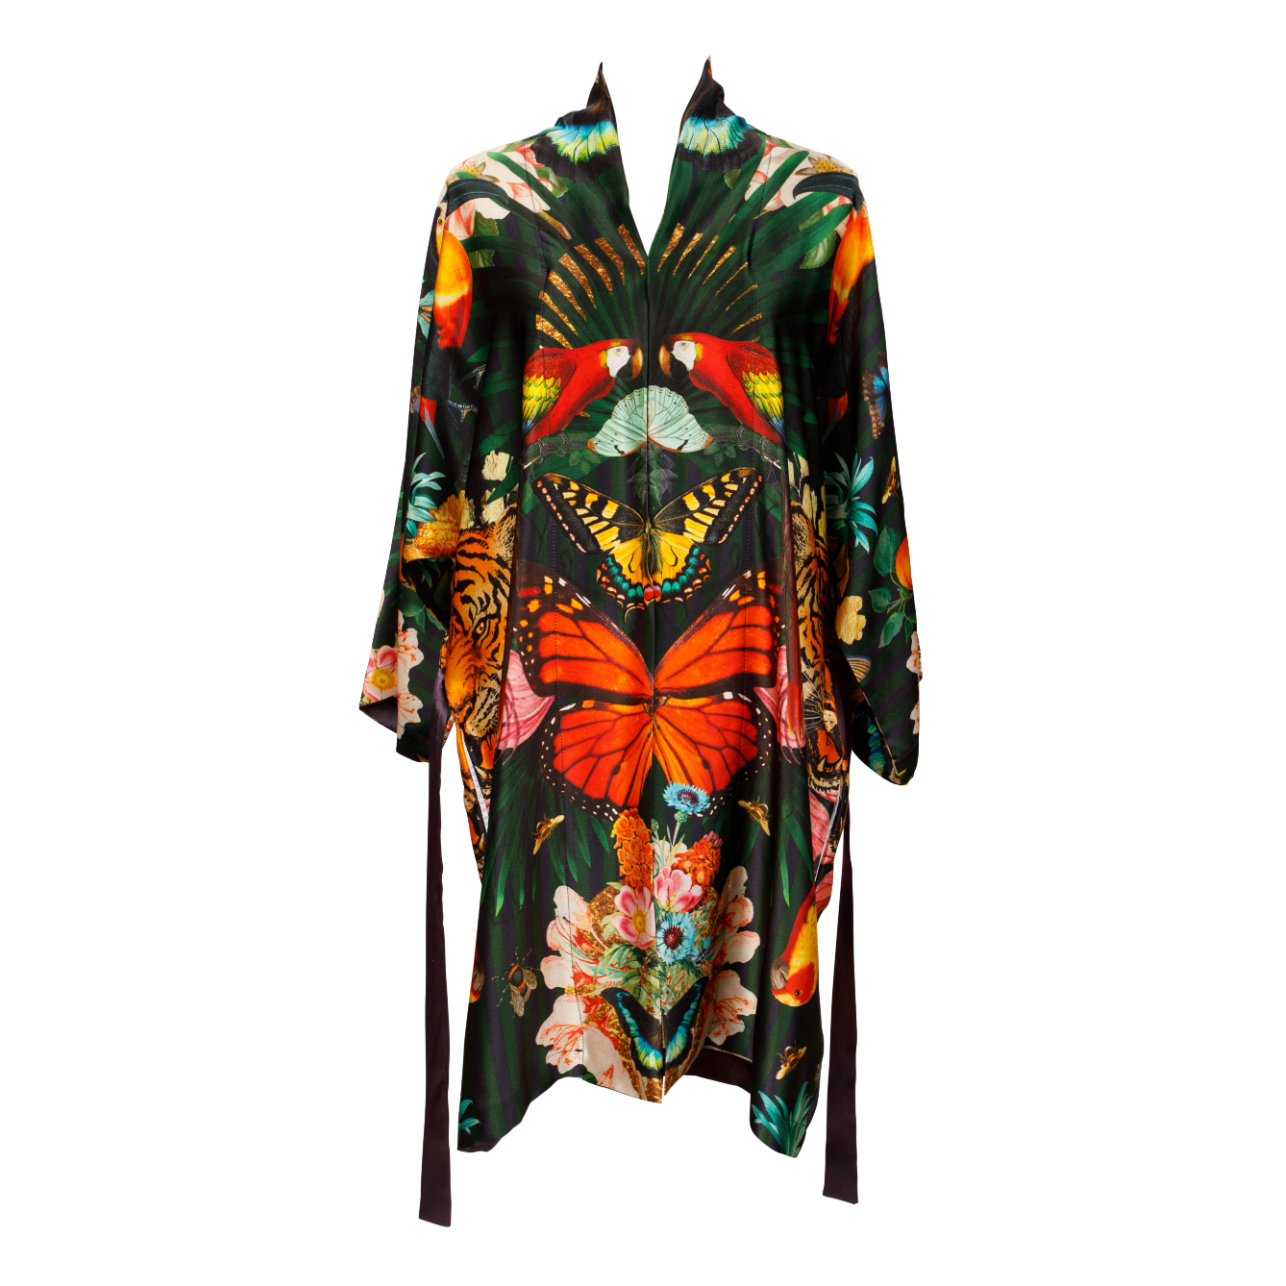 A luxury 100% silk Kimono in a maximalist tropical inspired design against a dark background called - Paradise Lost Night